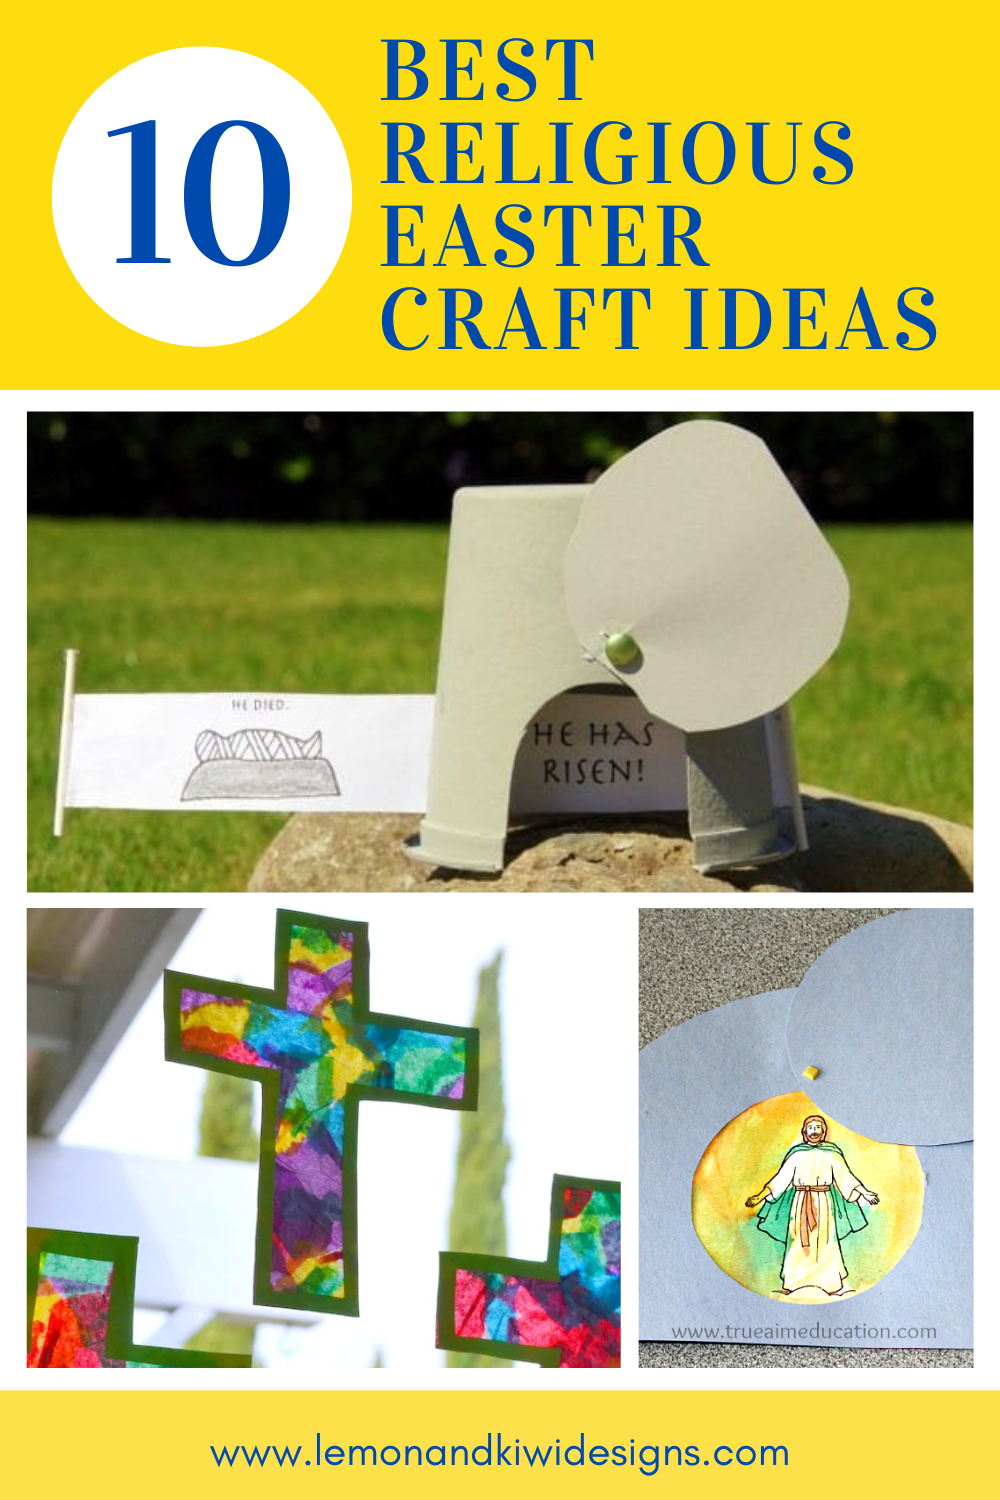 10 Best Religious Easter Crafts and Printable Activities for Kids